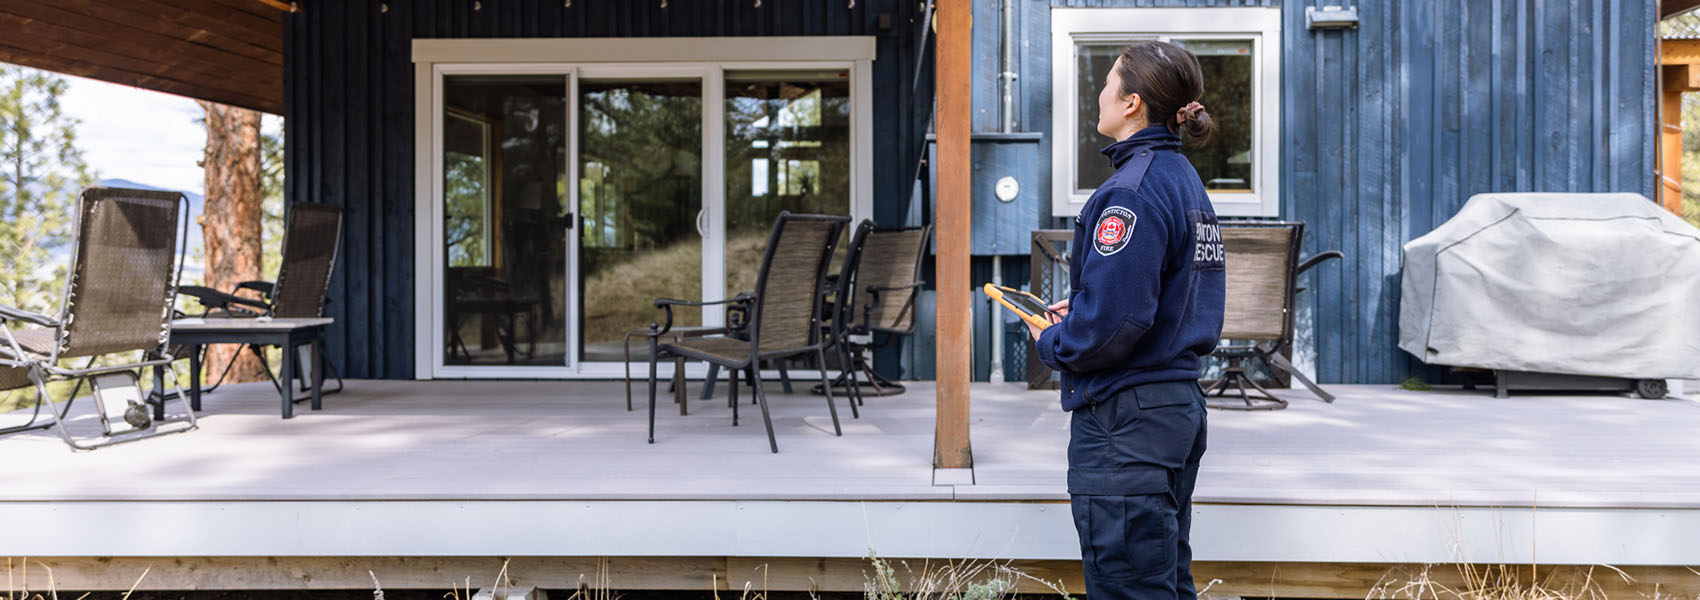 FireSmart BC home assessment being performed by woman in a blue uniform with tablet